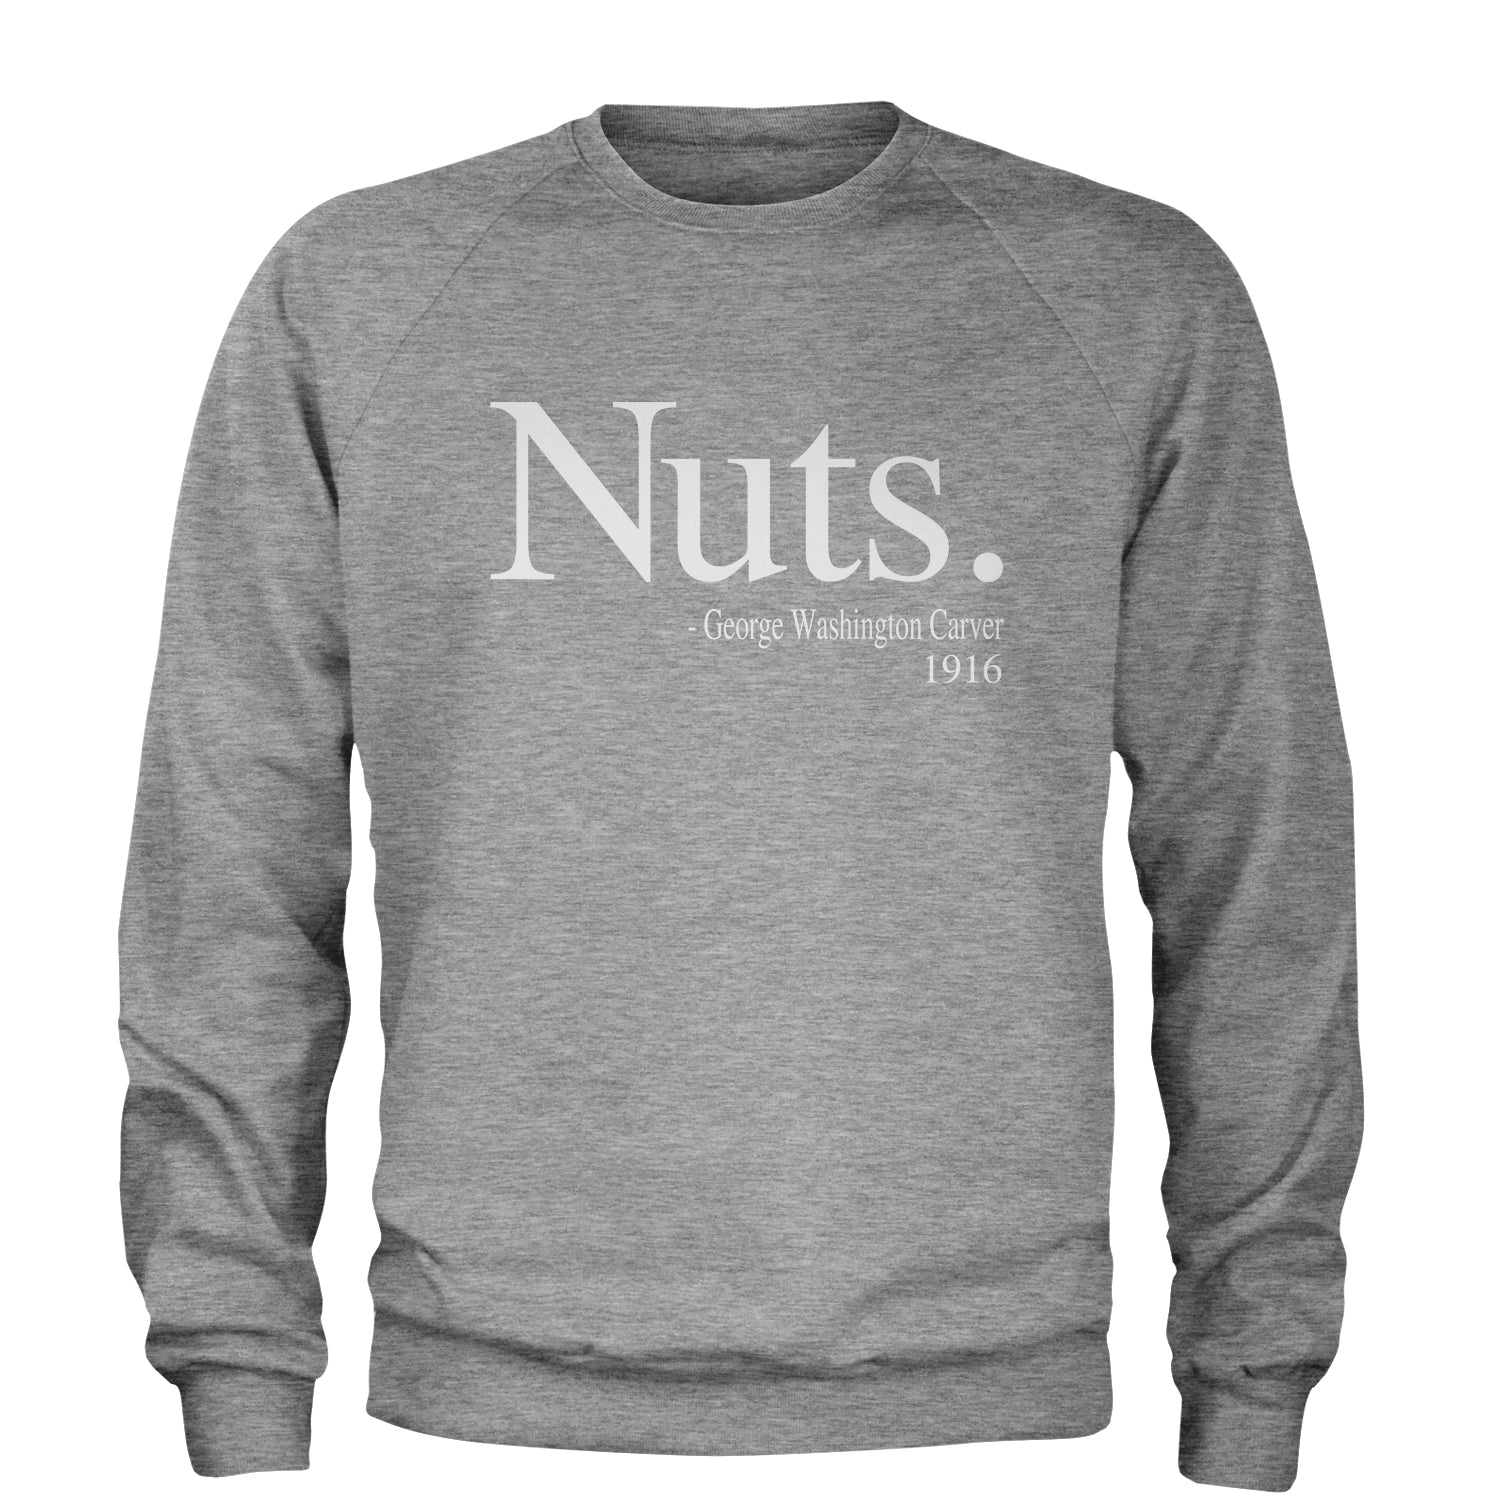 Nuts Quote George Washington Carver Adult Crewneck Sweatshirt african, african american, afro, american, black, carver, george, go, harriet, history, malcolm, me, nah, nuts, out, parks, rosa, try, tubman, washington, we, x by Expression Tees